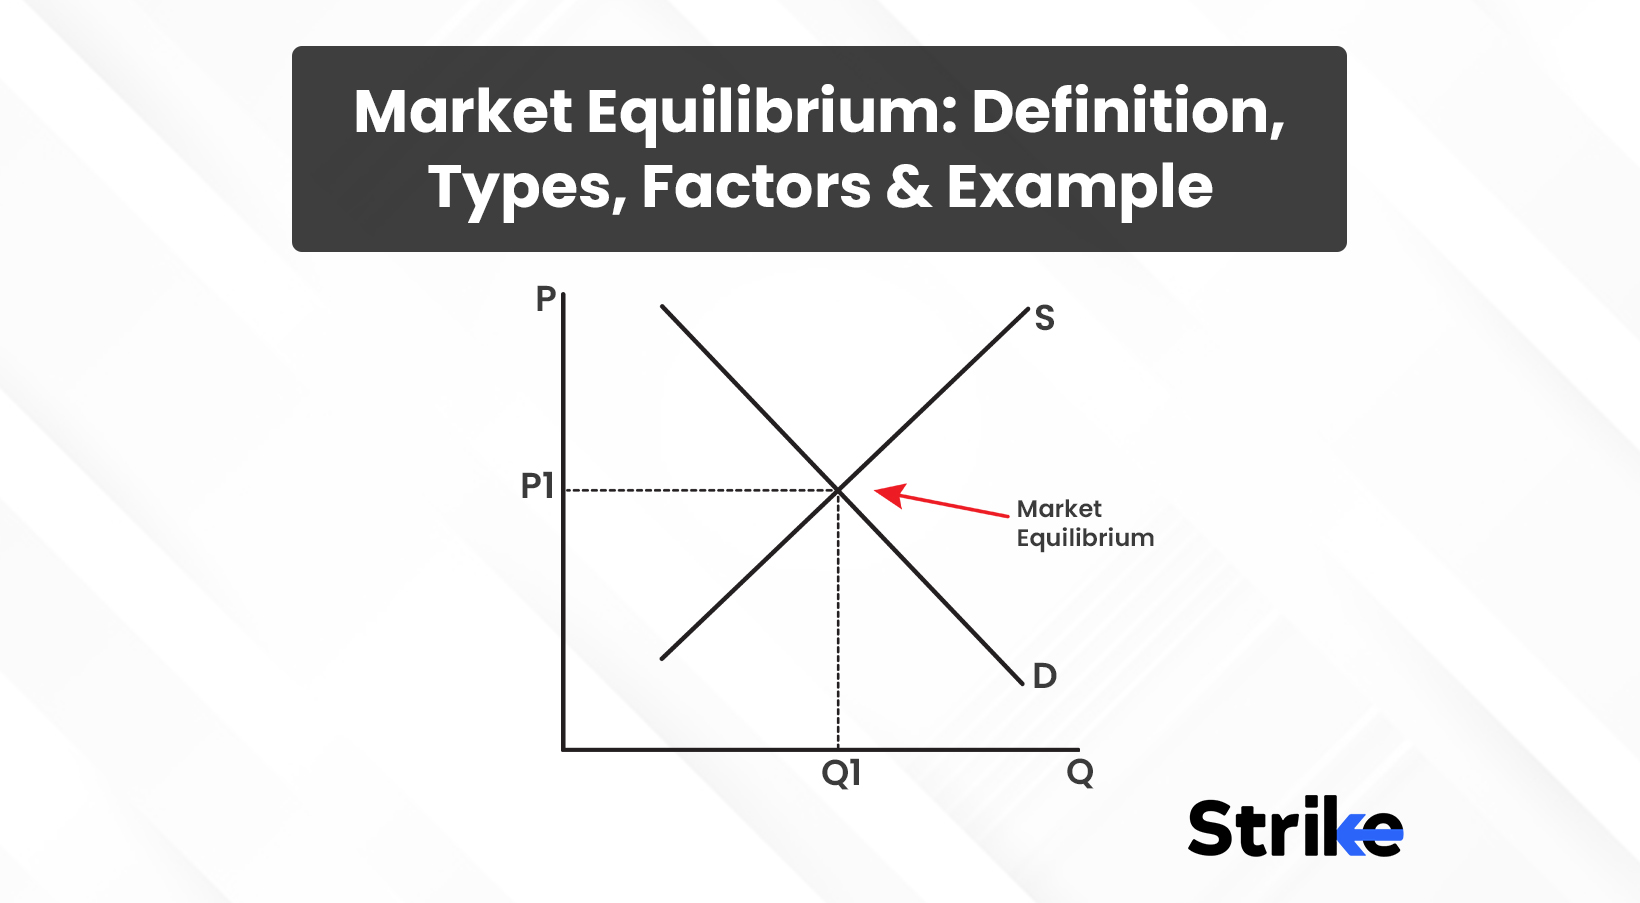 Market Equilibrium: Definition, Types, Factors, and Example